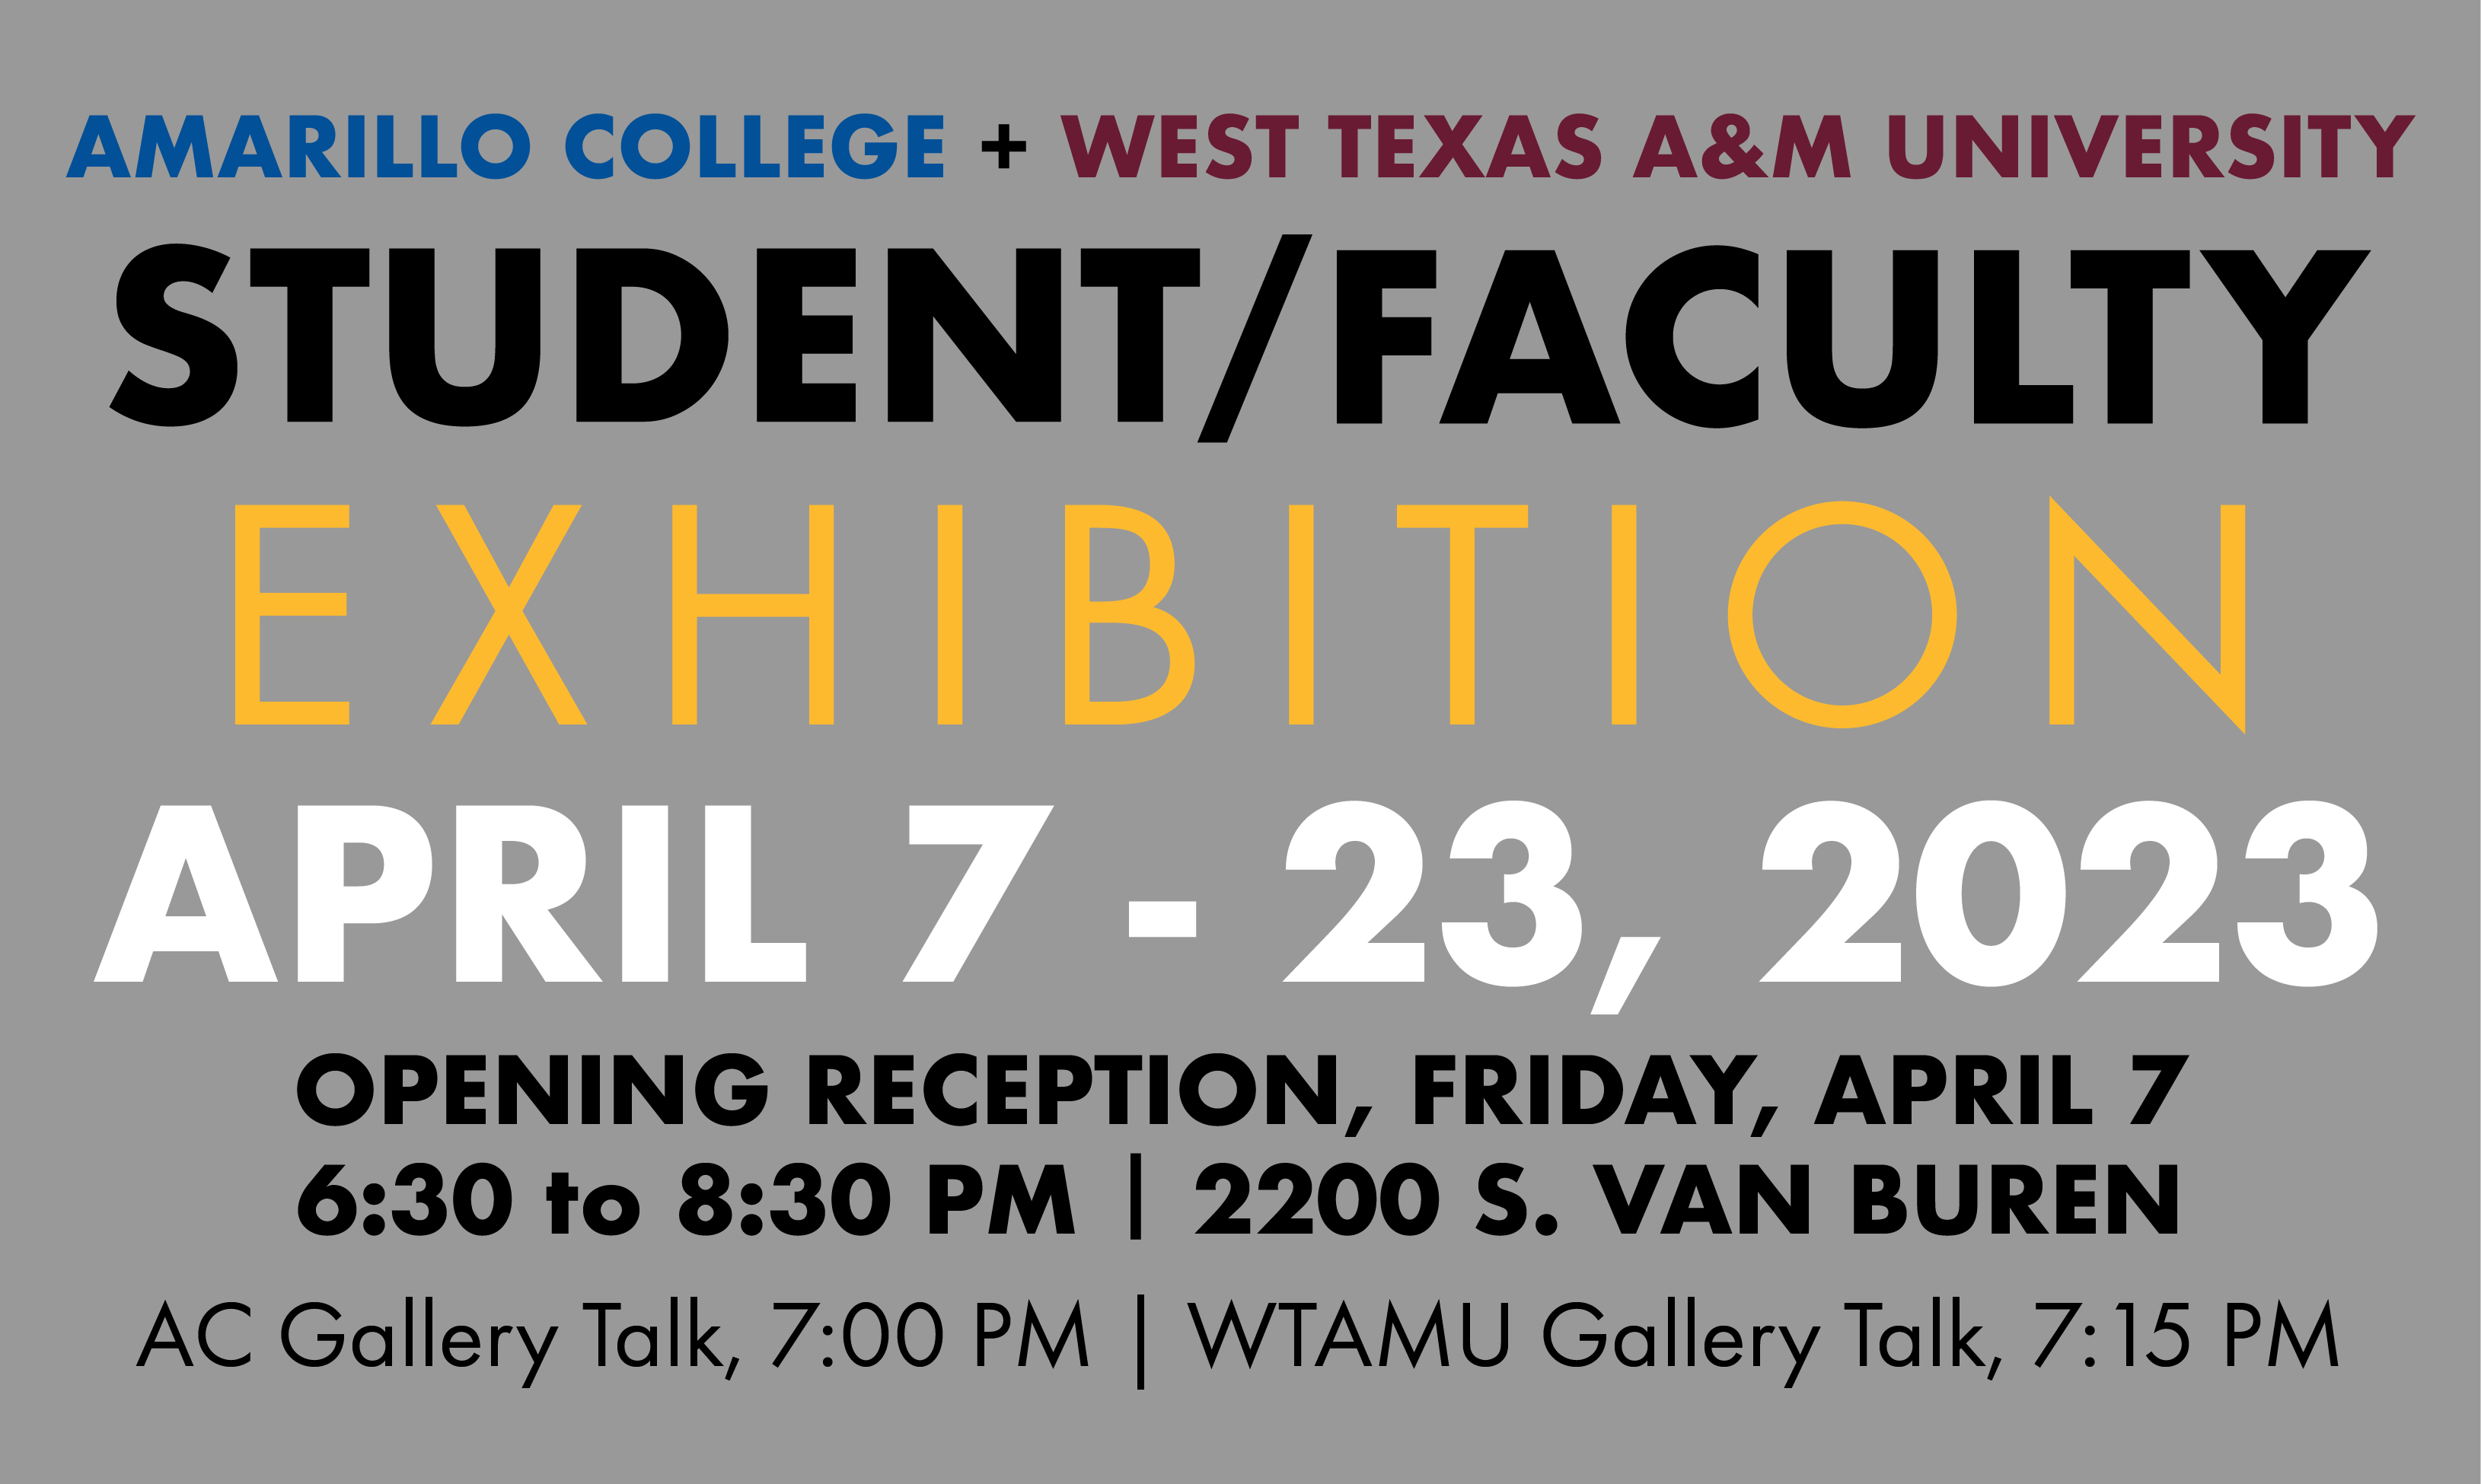 Time and dates for Student/Faculty Exhibit